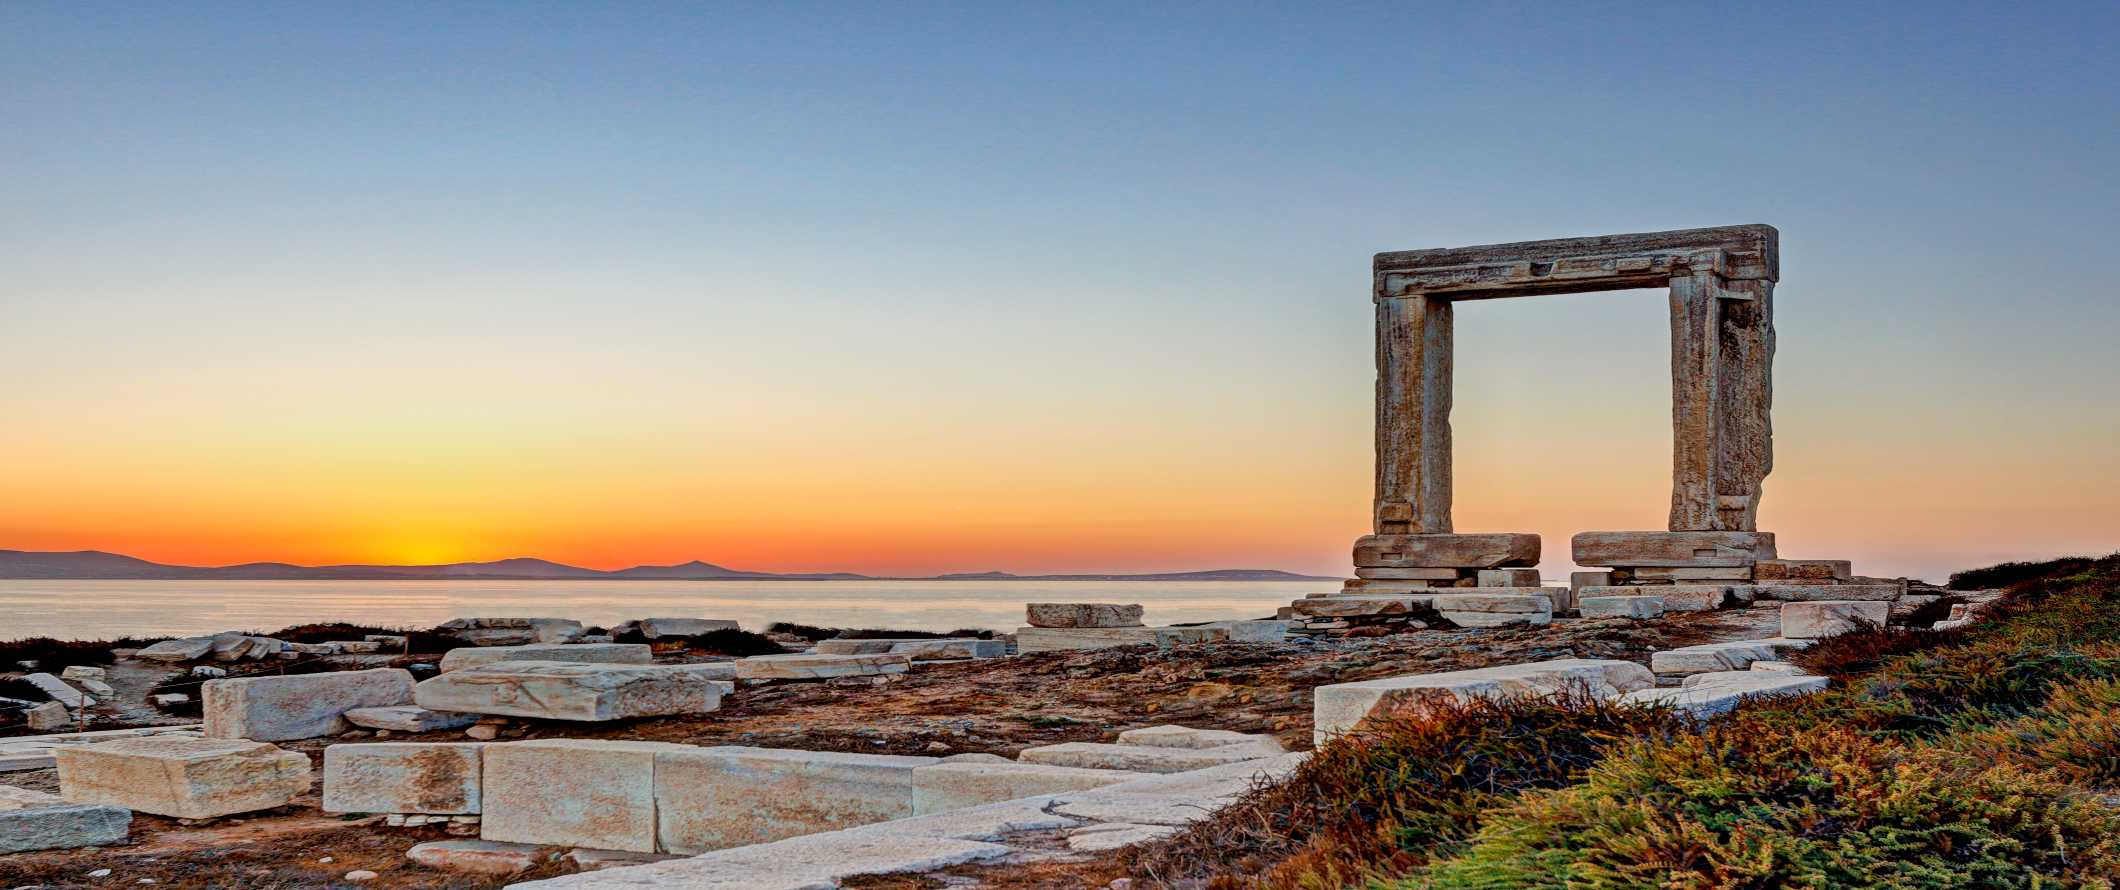 The marble Portara gate at sunset in Naxos, Greece.